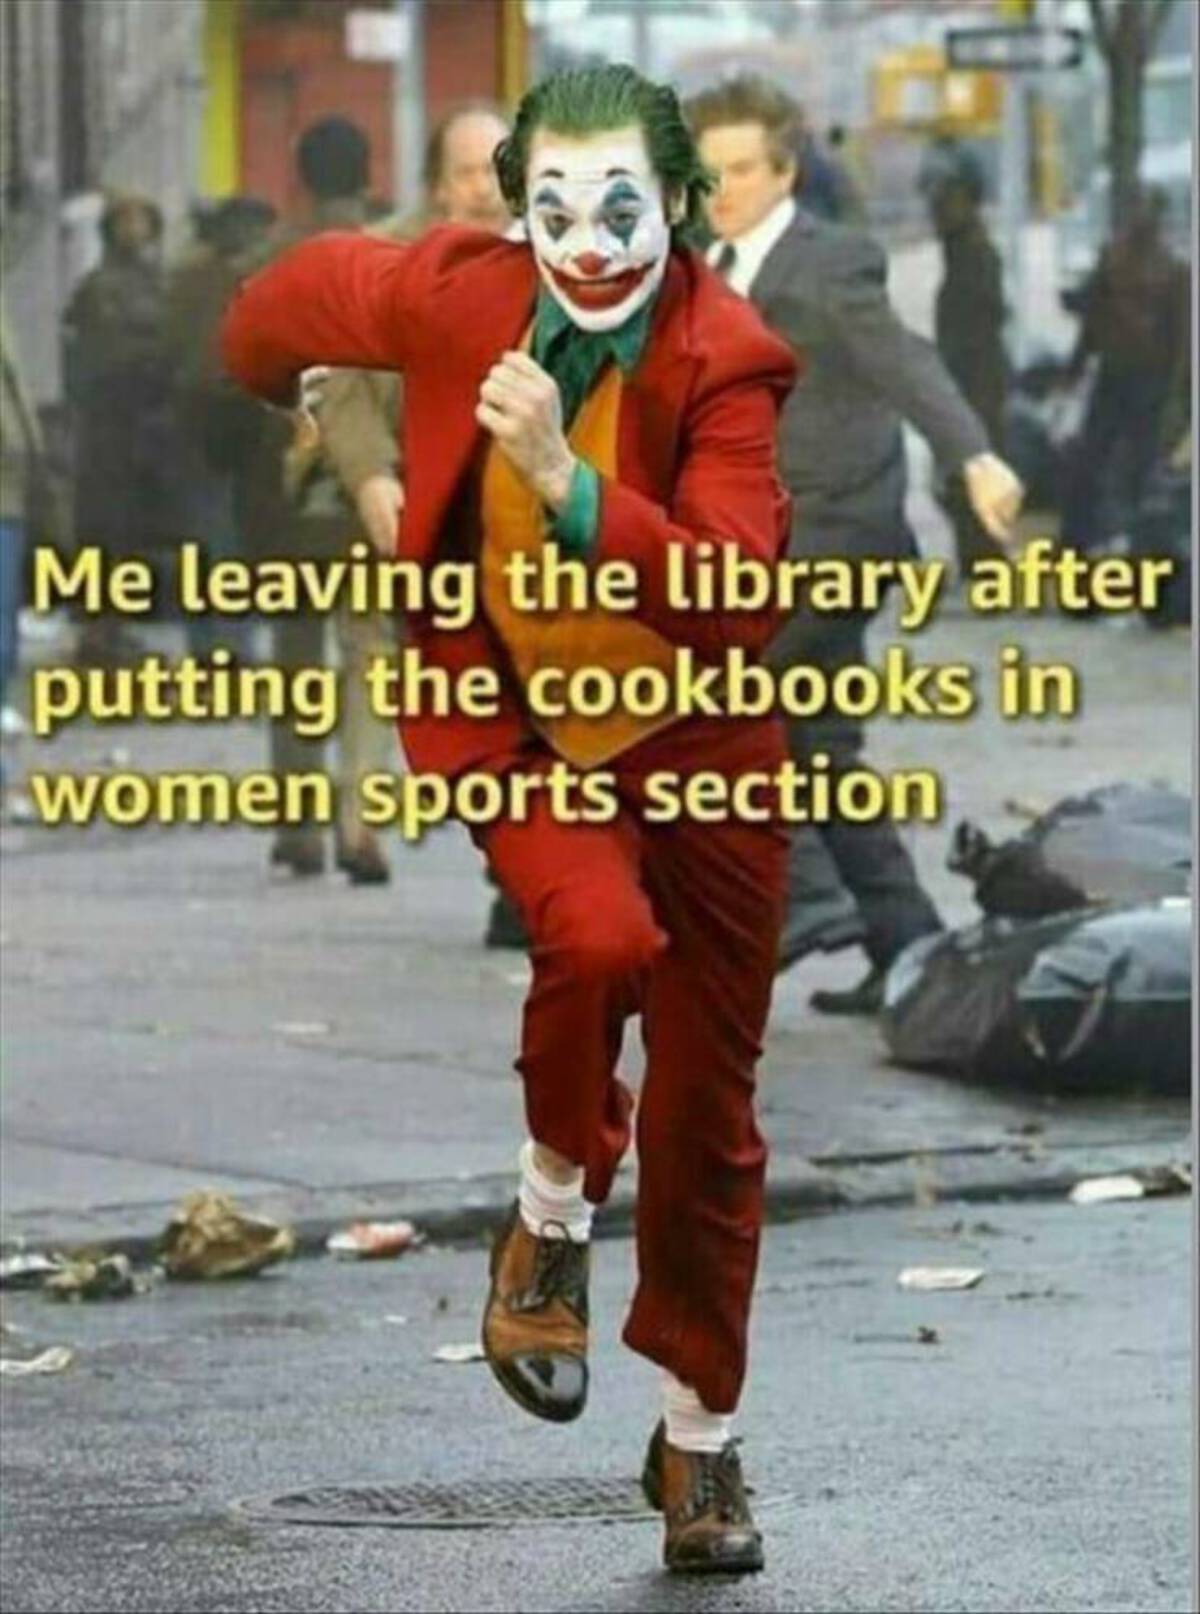 joker running - Me leaving the library after putting the cookbooks in women sports section